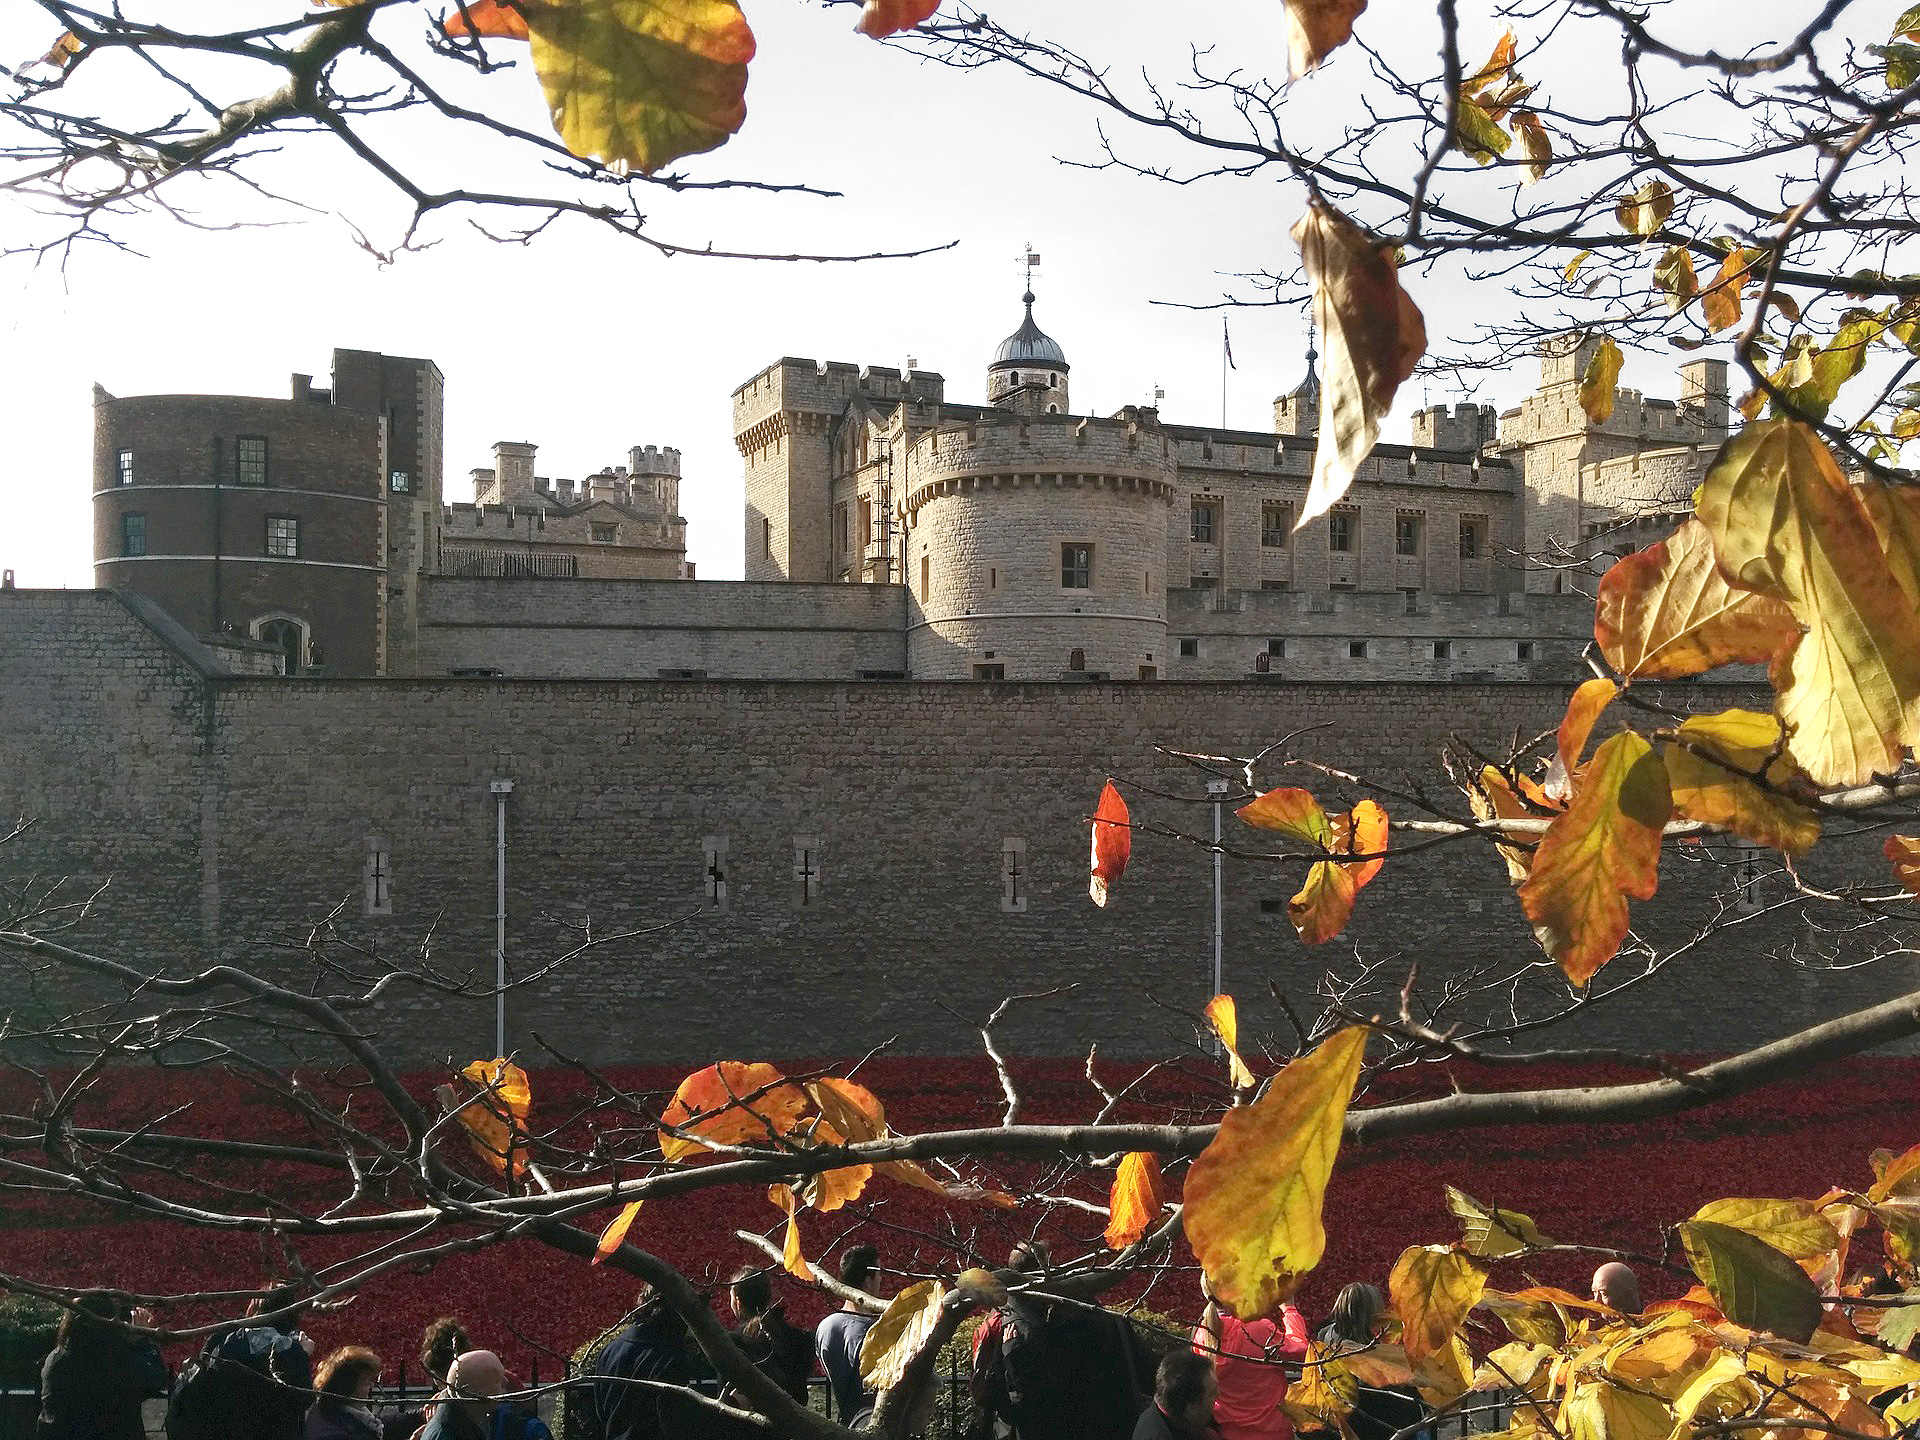 Things to do in London - The Tower of London